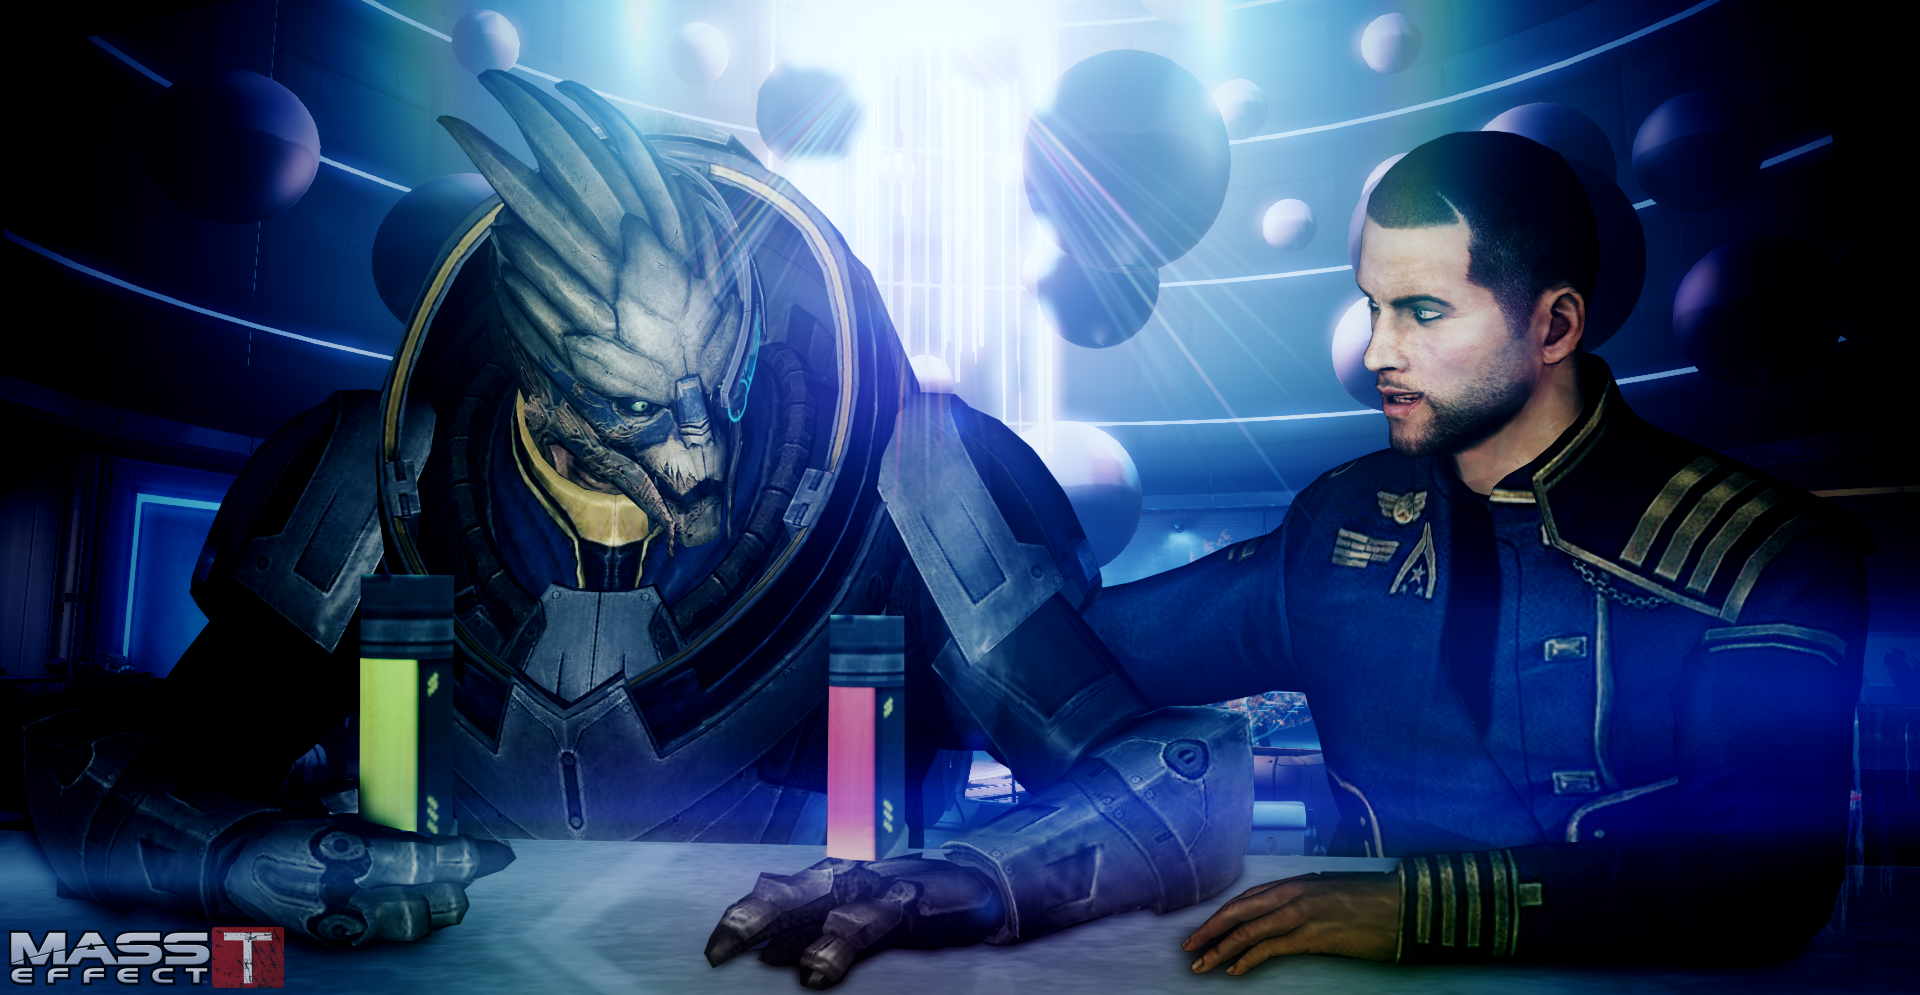 General 1920x995 Mass Effect video games science fiction PC gaming video game men